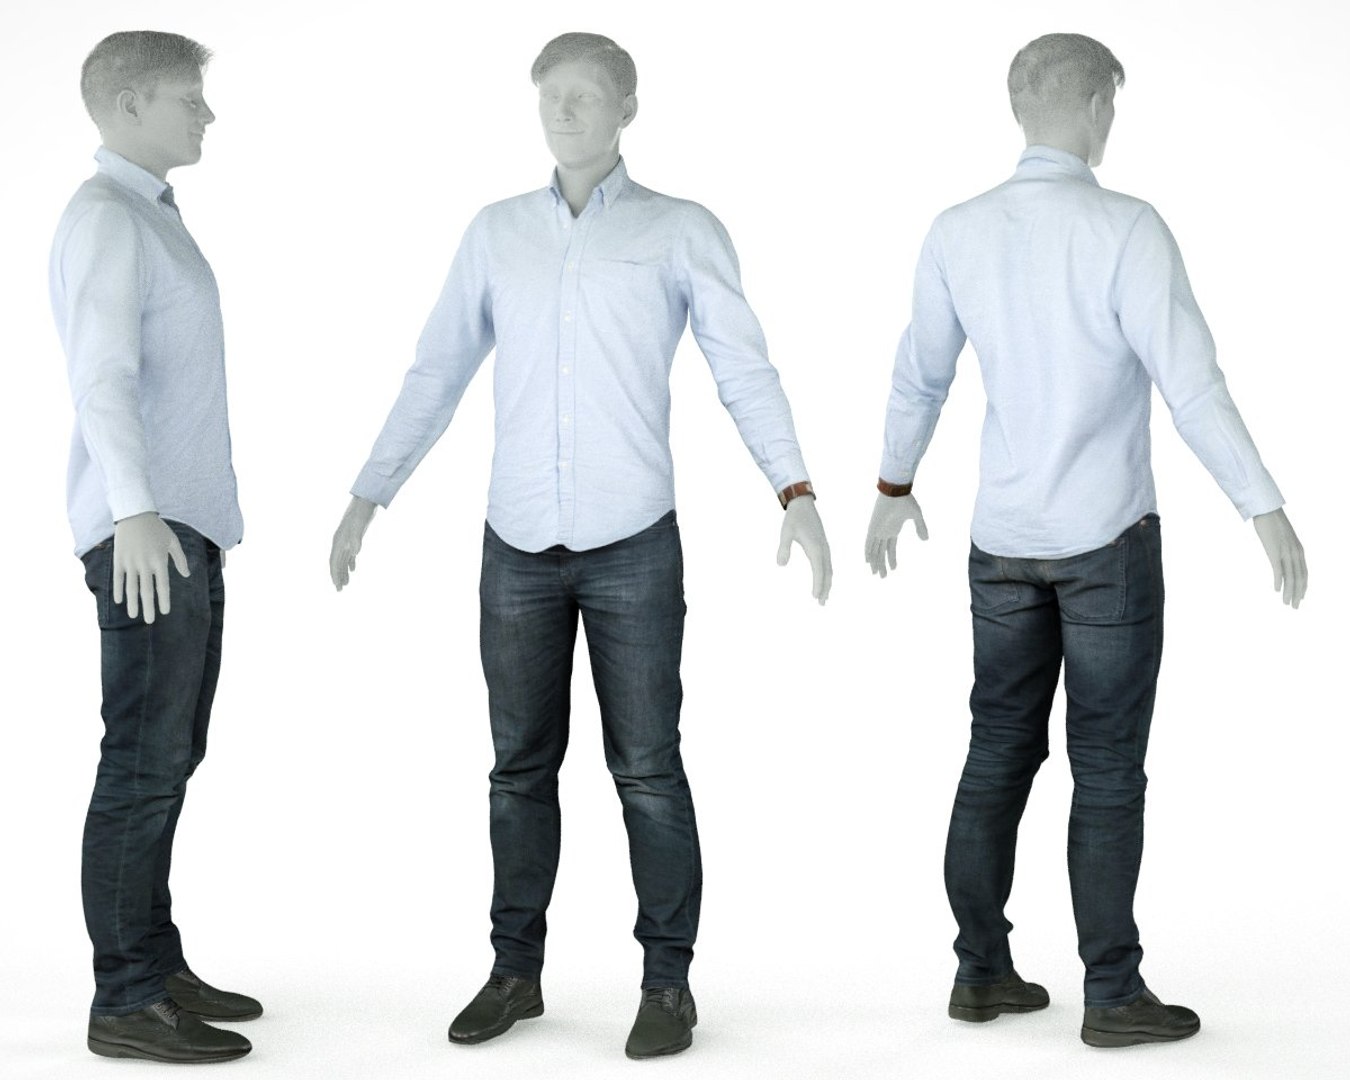 Male clothing outfit 3D model - TurboSquid 1329805